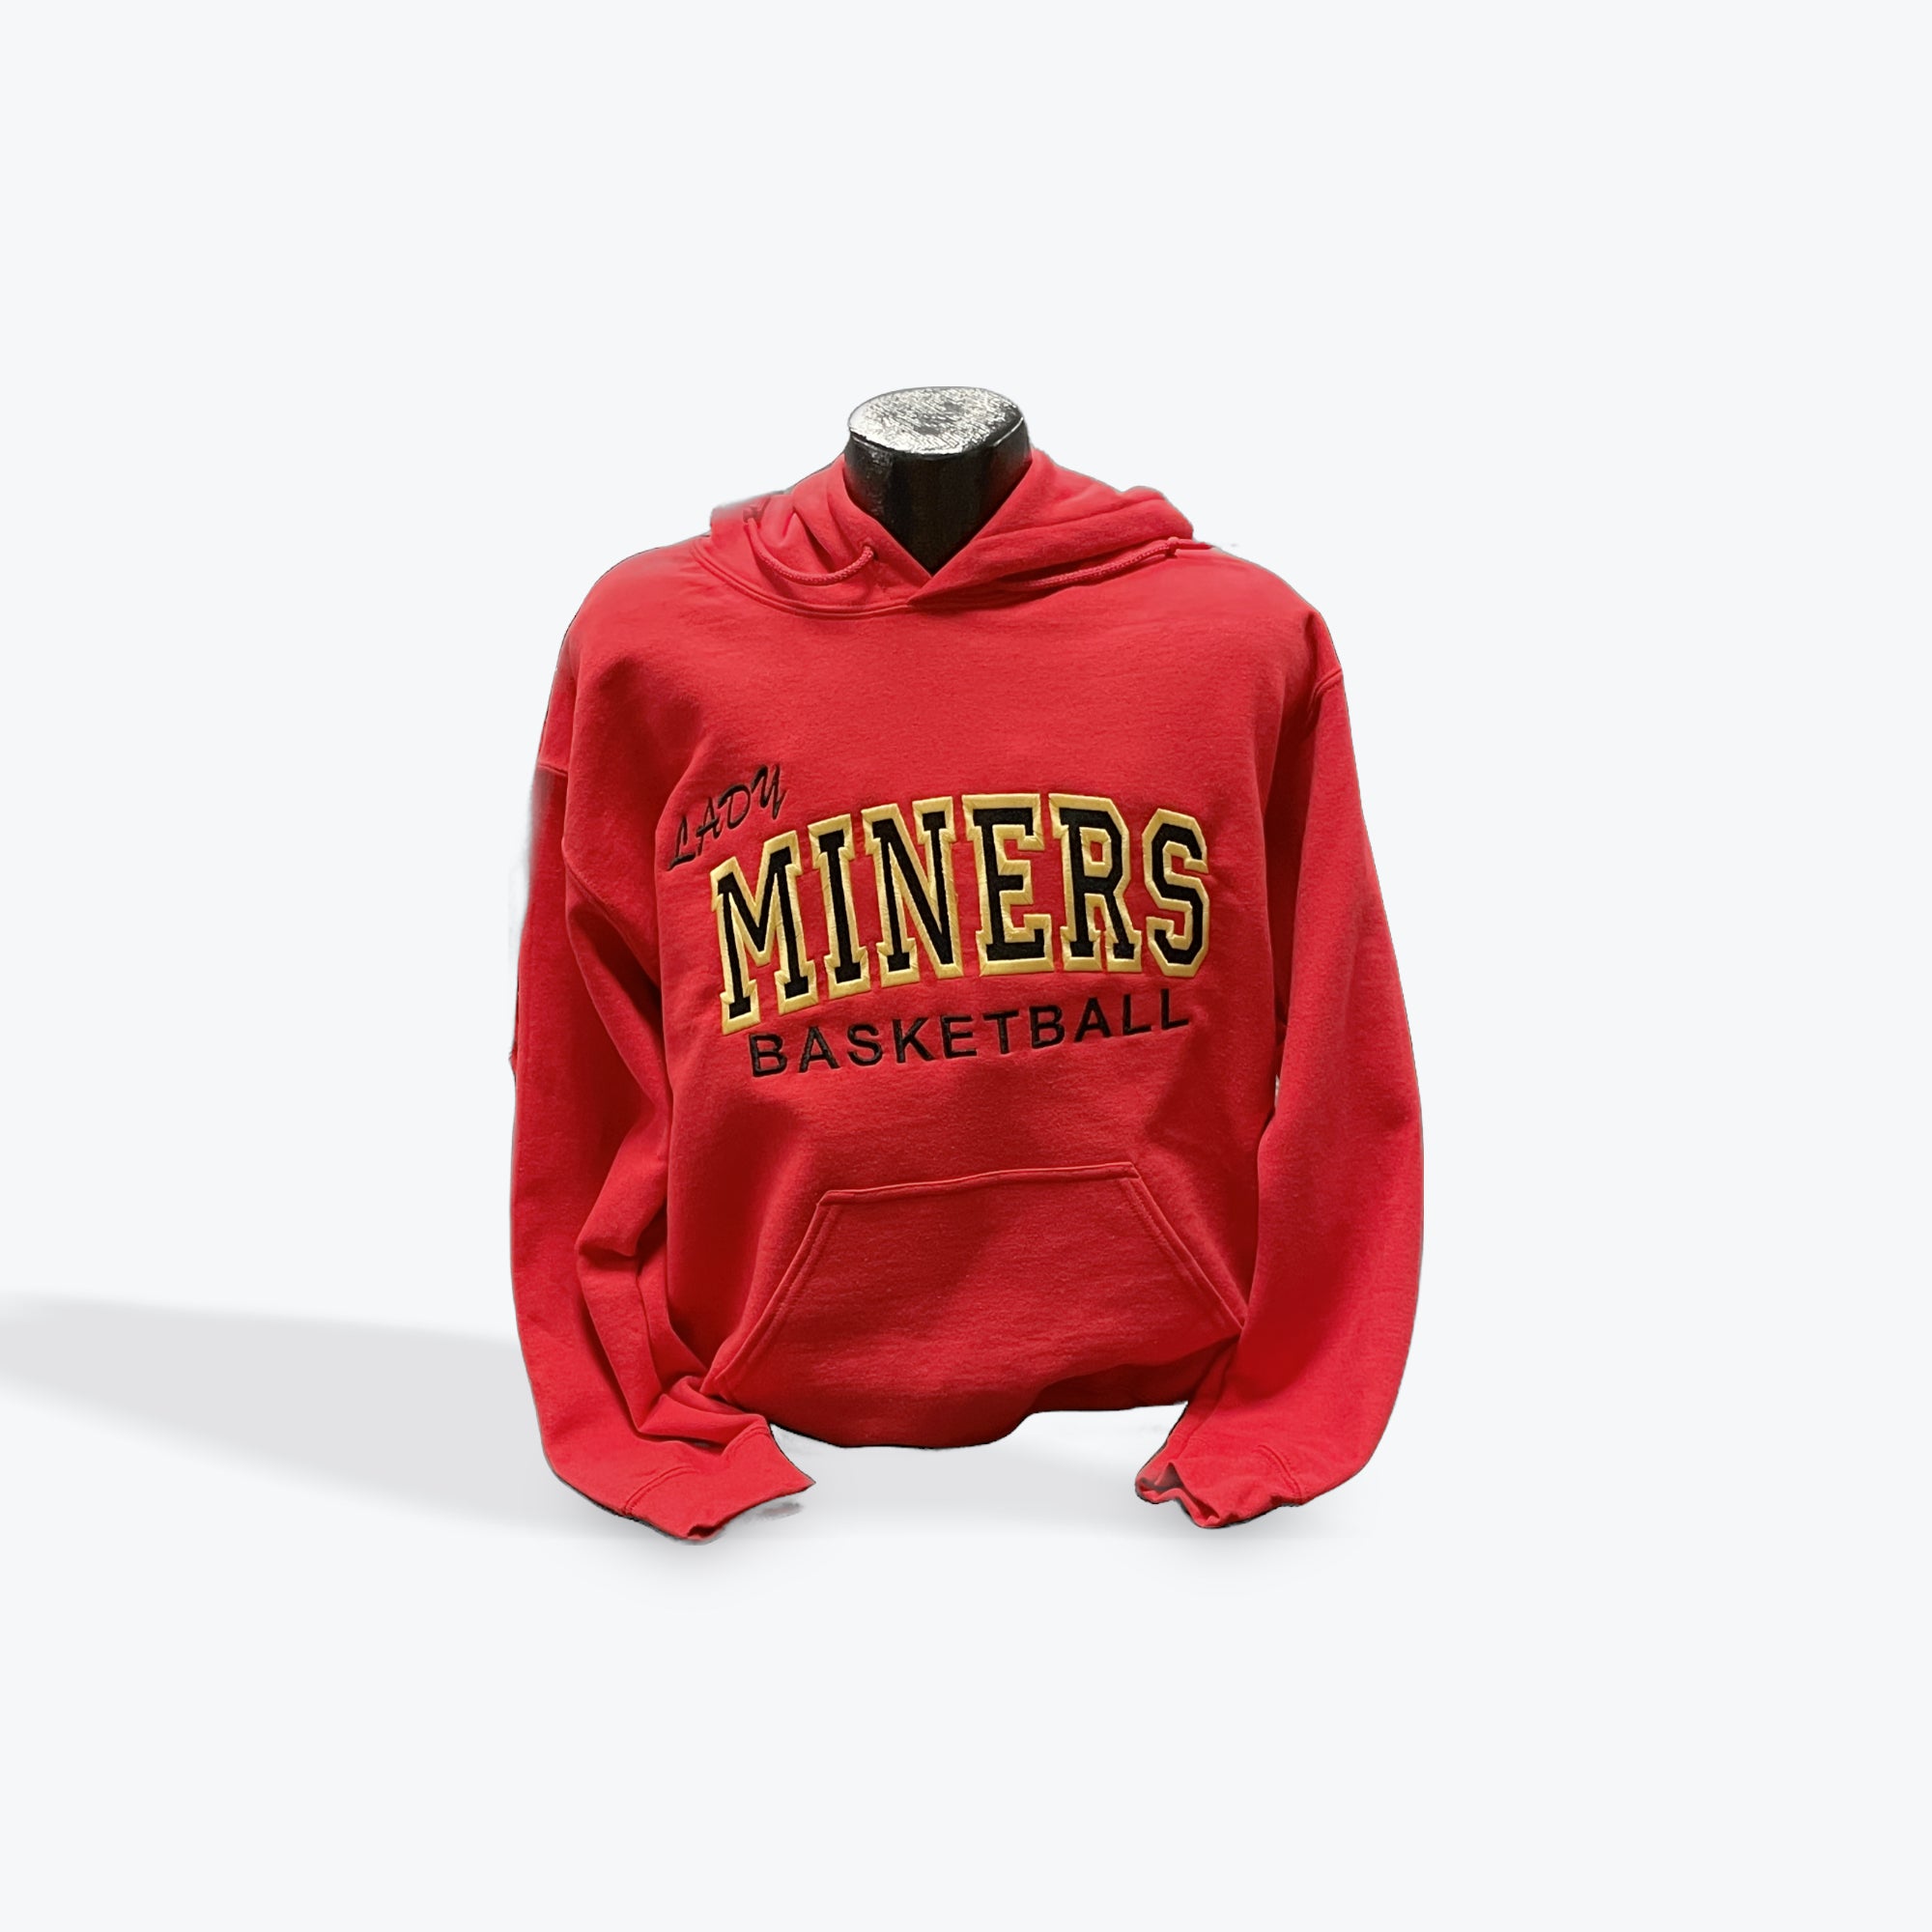 Embroidered Lady Miners Basketball Sweatshirt Red | Old 40 Trading Co